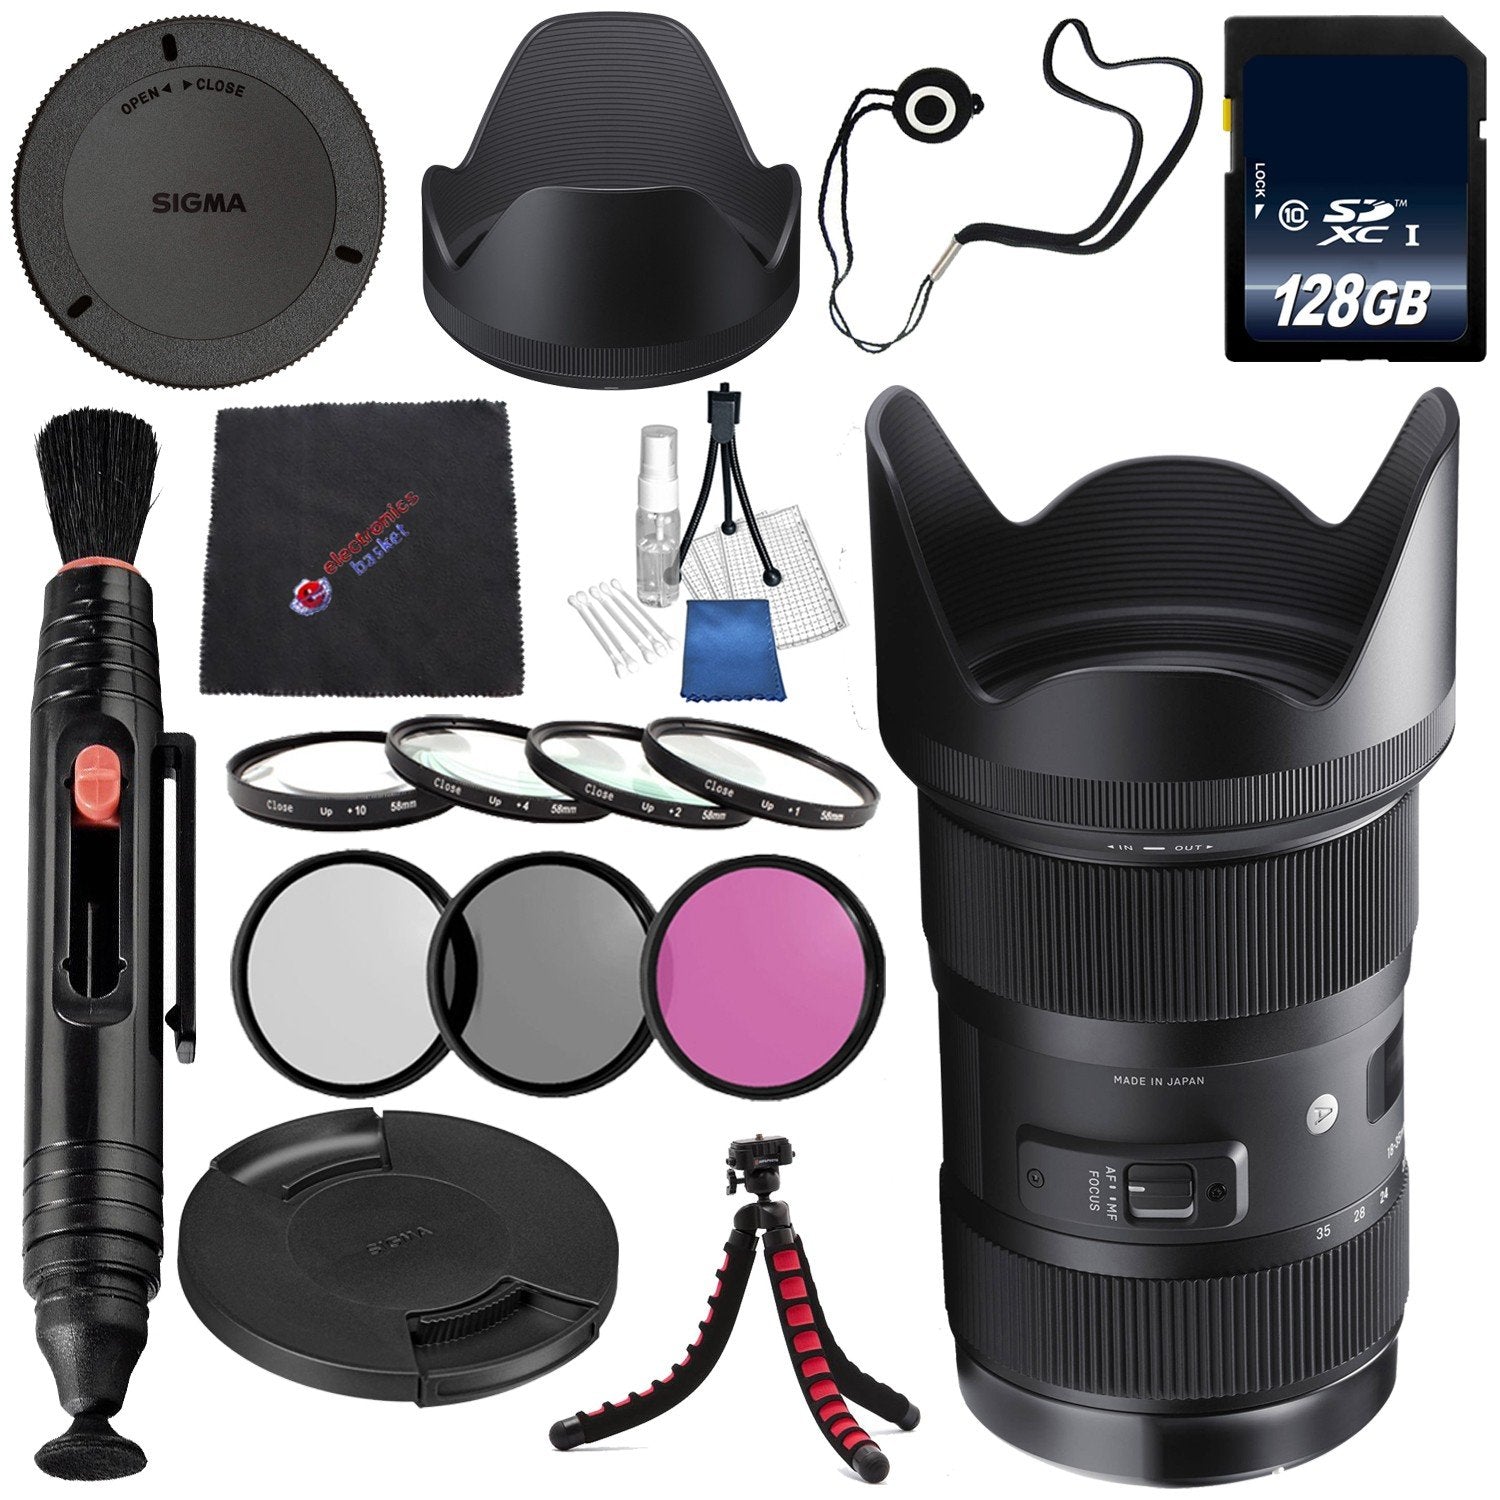 Sigma 18-35mm f/1.8 DC HSM Art Lens for Canon #210101 + 72mm 3 Piece Filter Kit + 128GB SDXC Card + Lens Pen Cleaner + Microfiber Cleaning Cloth Bundle